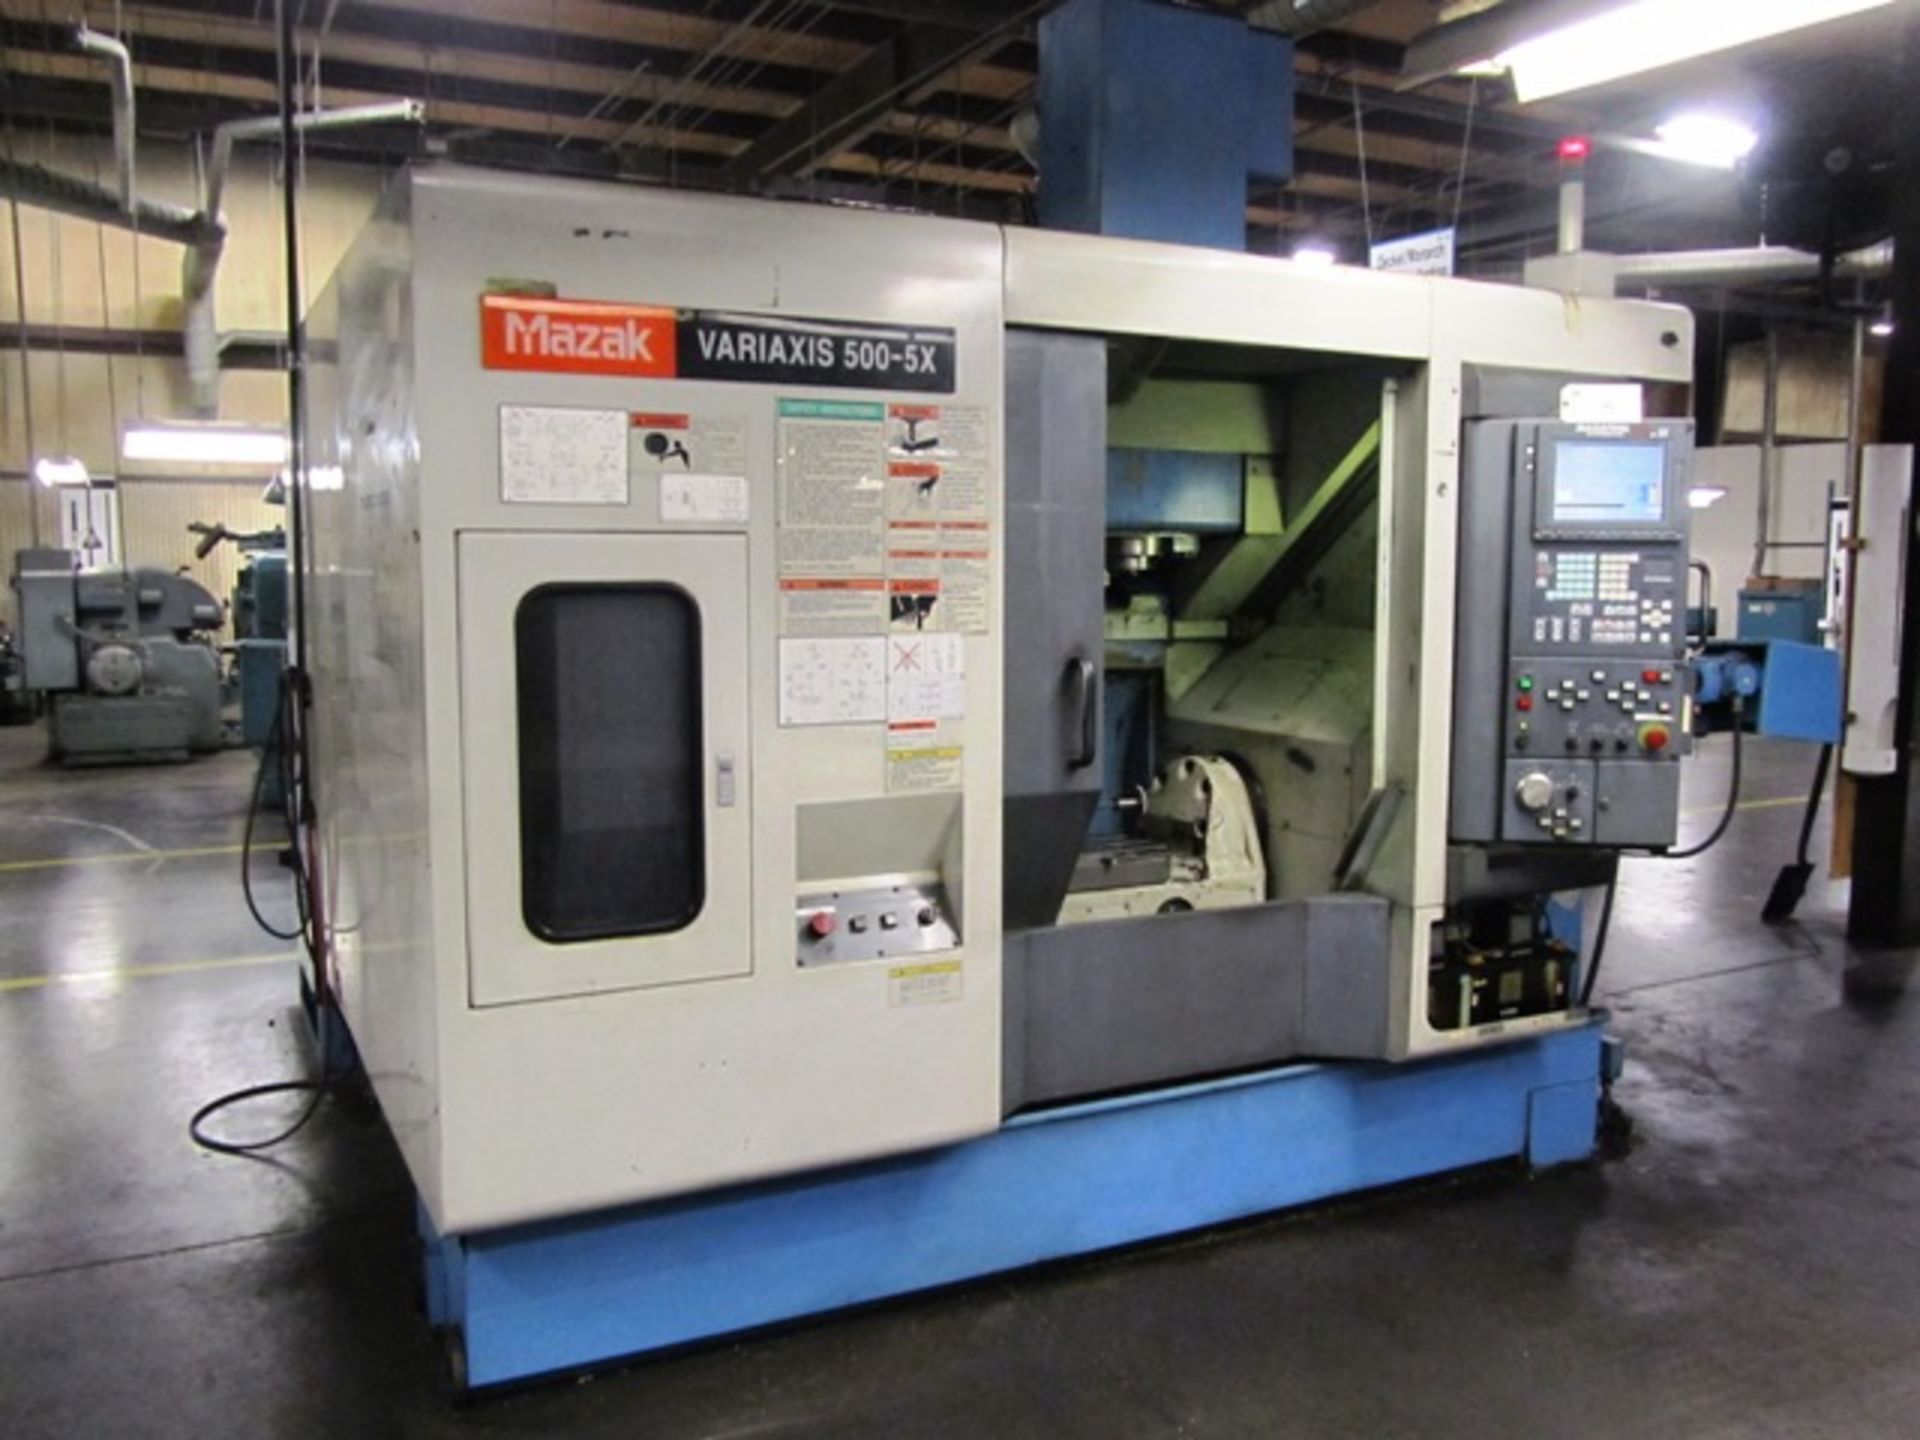 Mazak Variaxis 500-5x 5-Axis CNC Vertical Machining Center with 19'' Diameter Rotary Trunnion Table, - Image 3 of 4